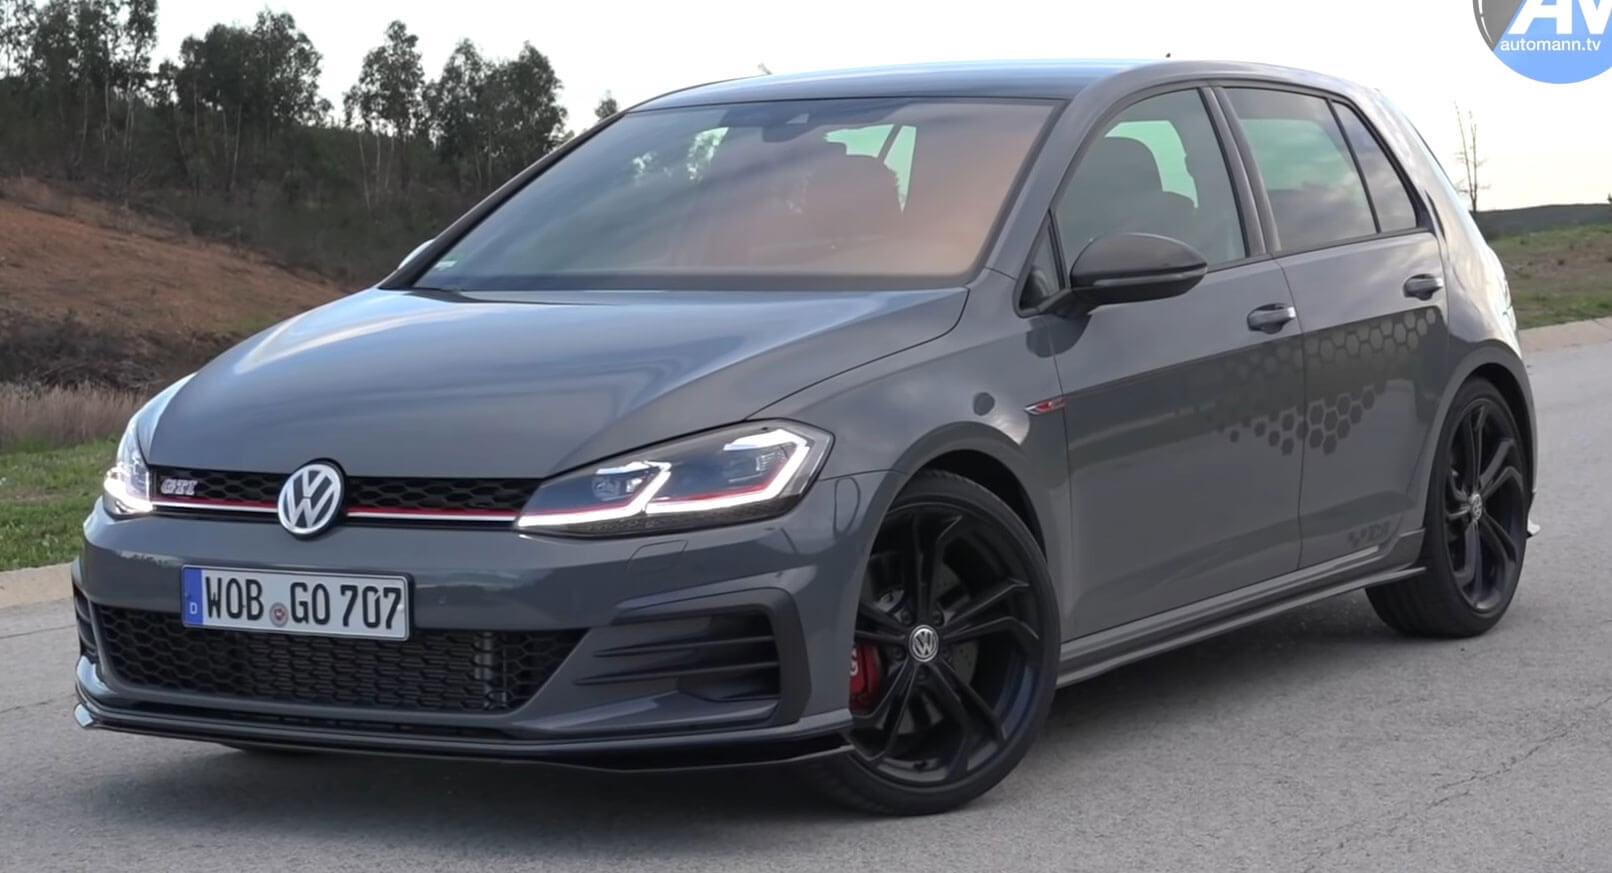 The VW Golf 7 GTI Is The Best Performance Hatchback On The Market! 